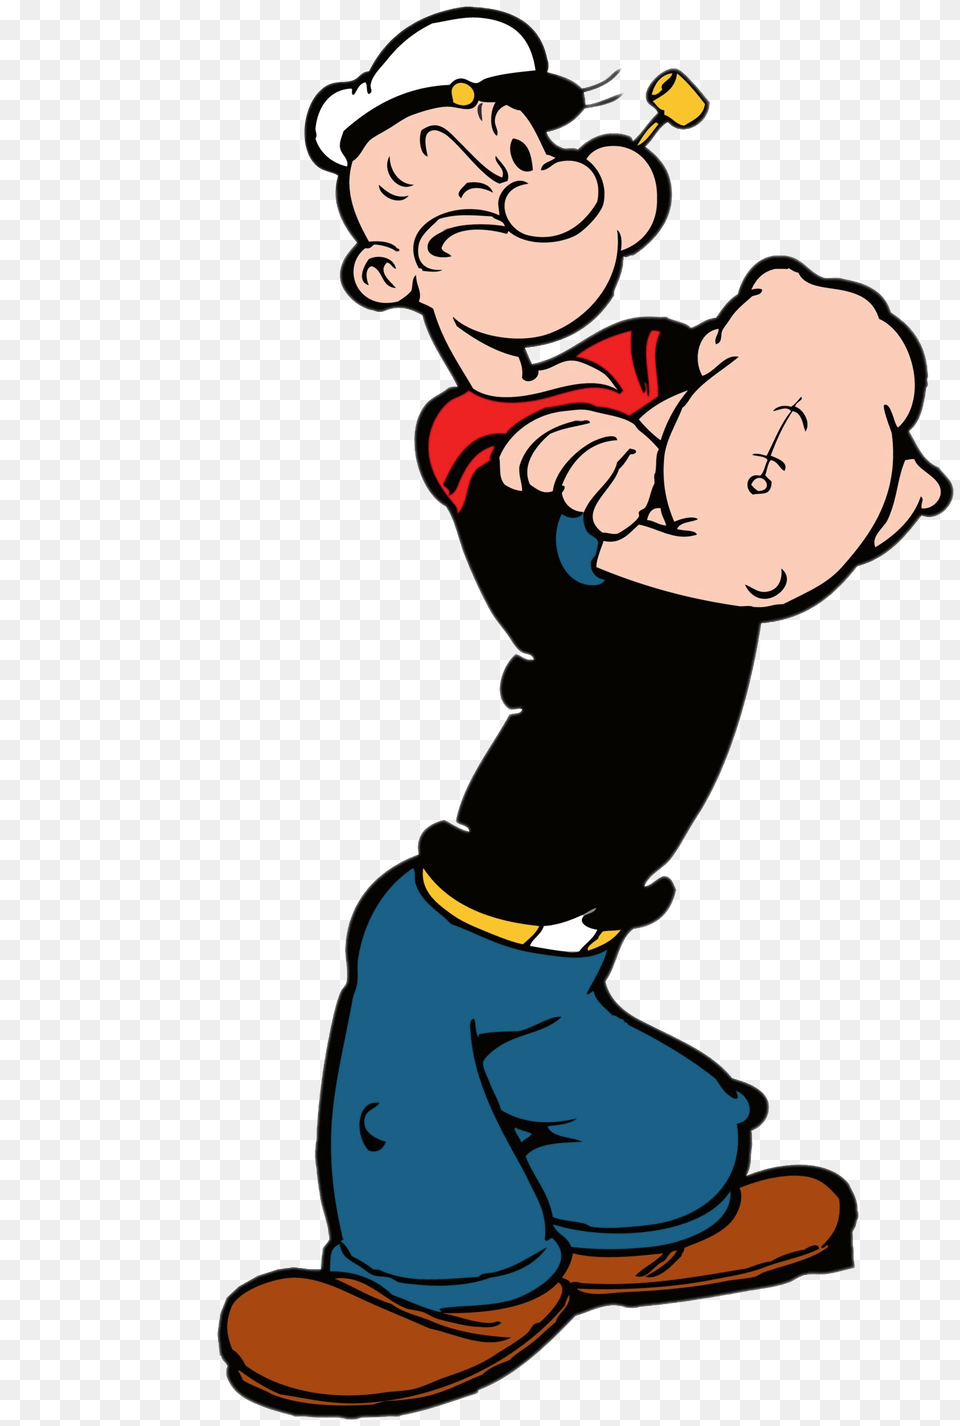 Popeye Arms Crossed Transparent, Cartoon, Baby, Person, Clothing Png Image